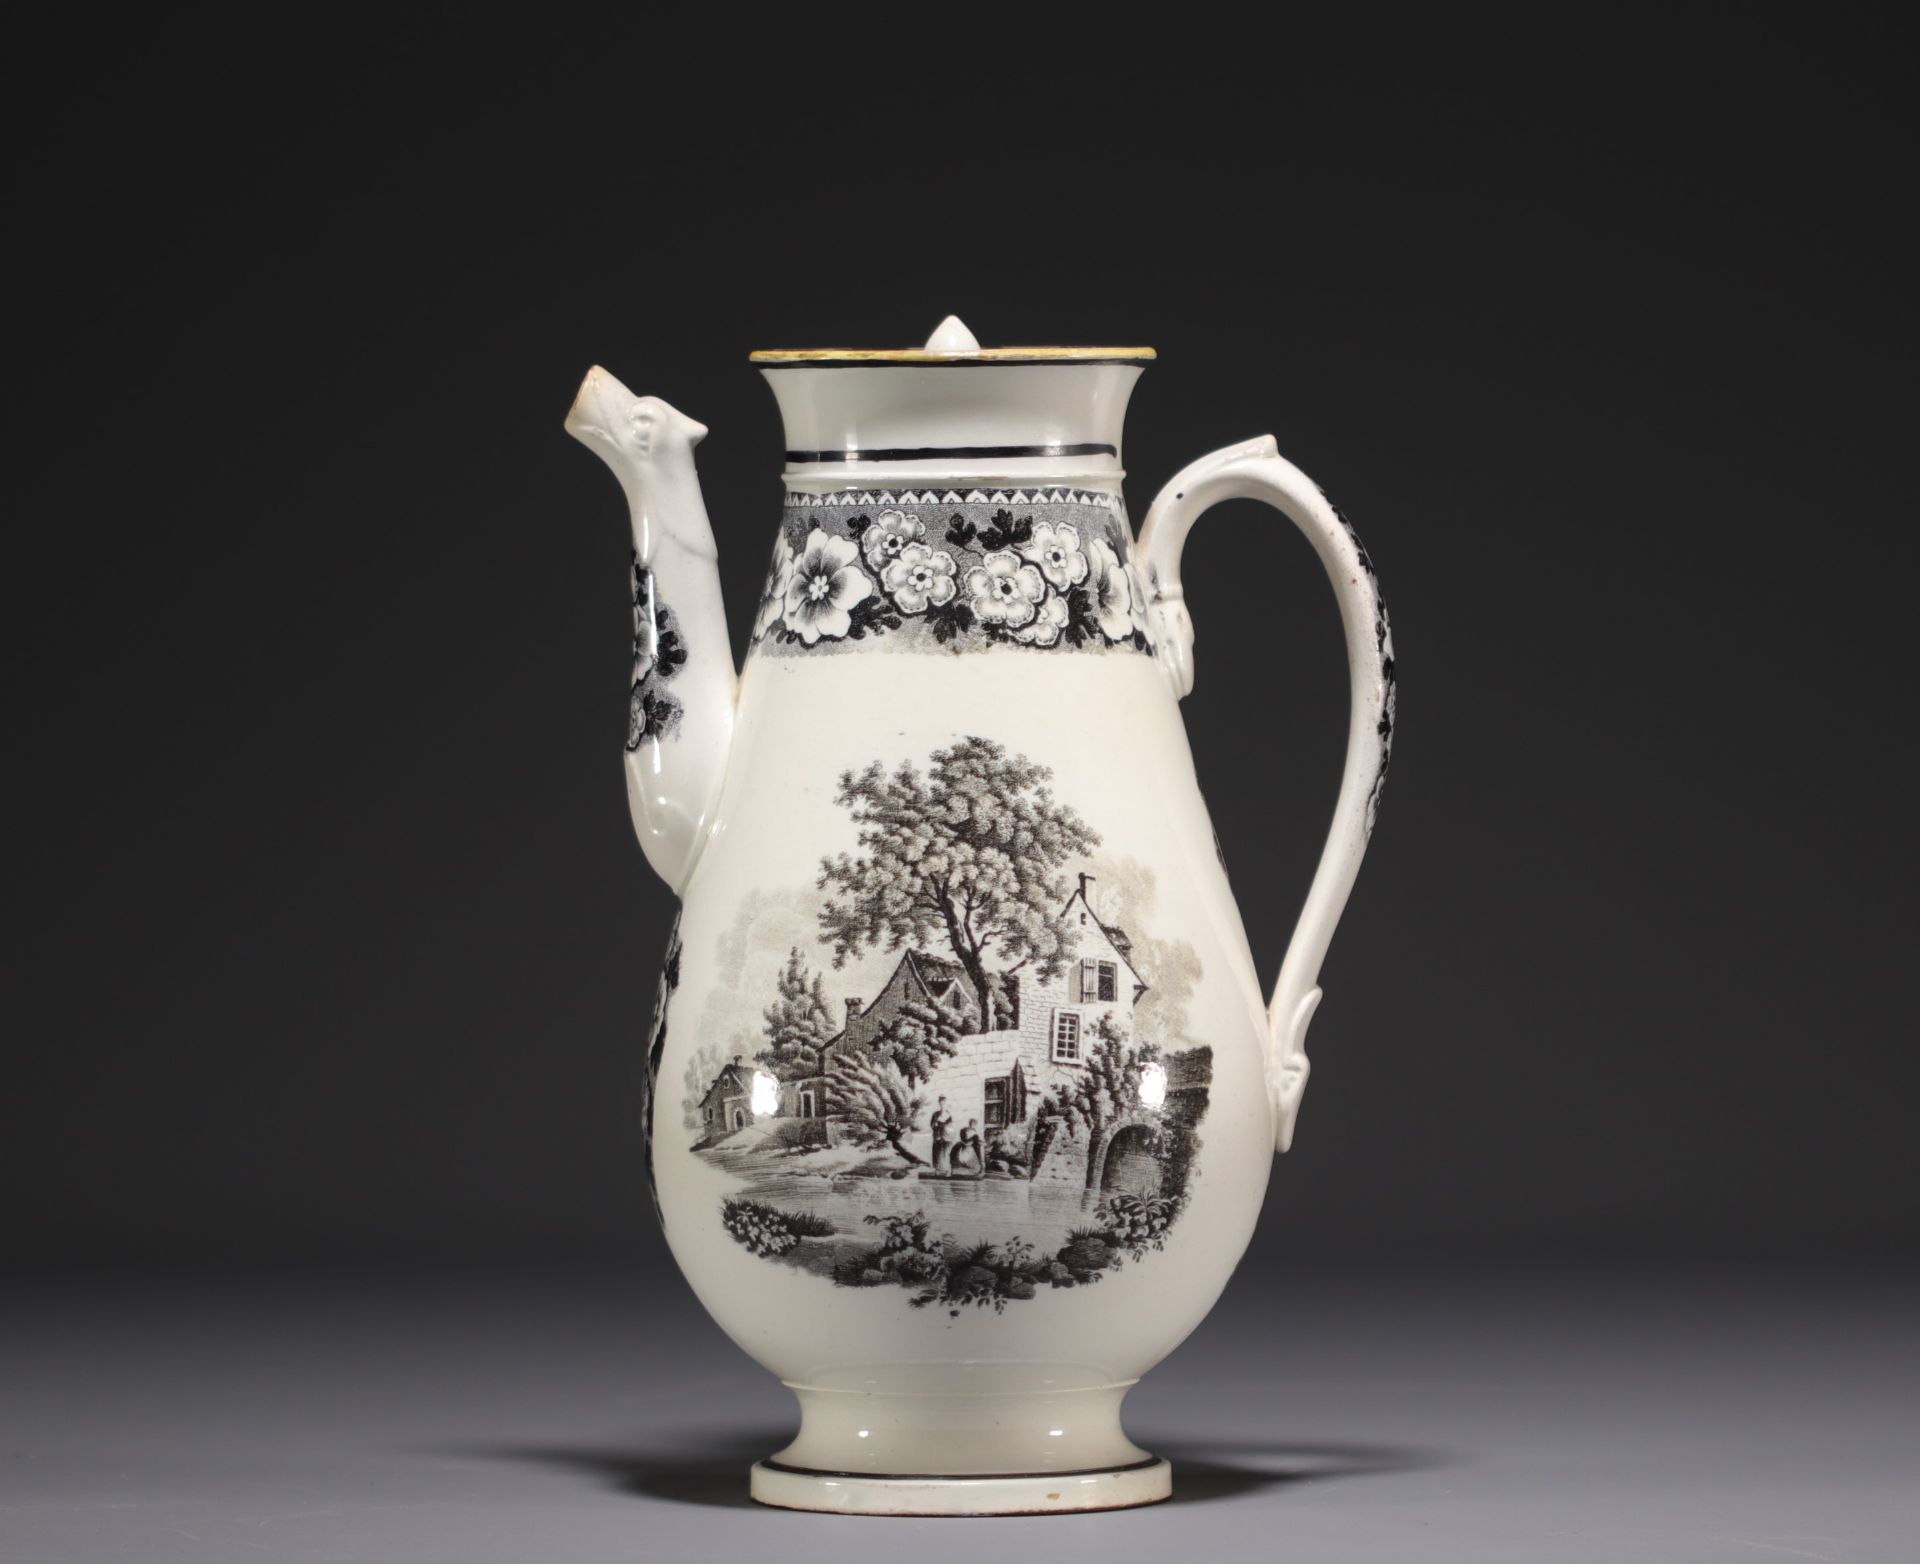 Villeroy & Boch - Earthenware coffee pot with country-style decor and floral entablature, 19th centu